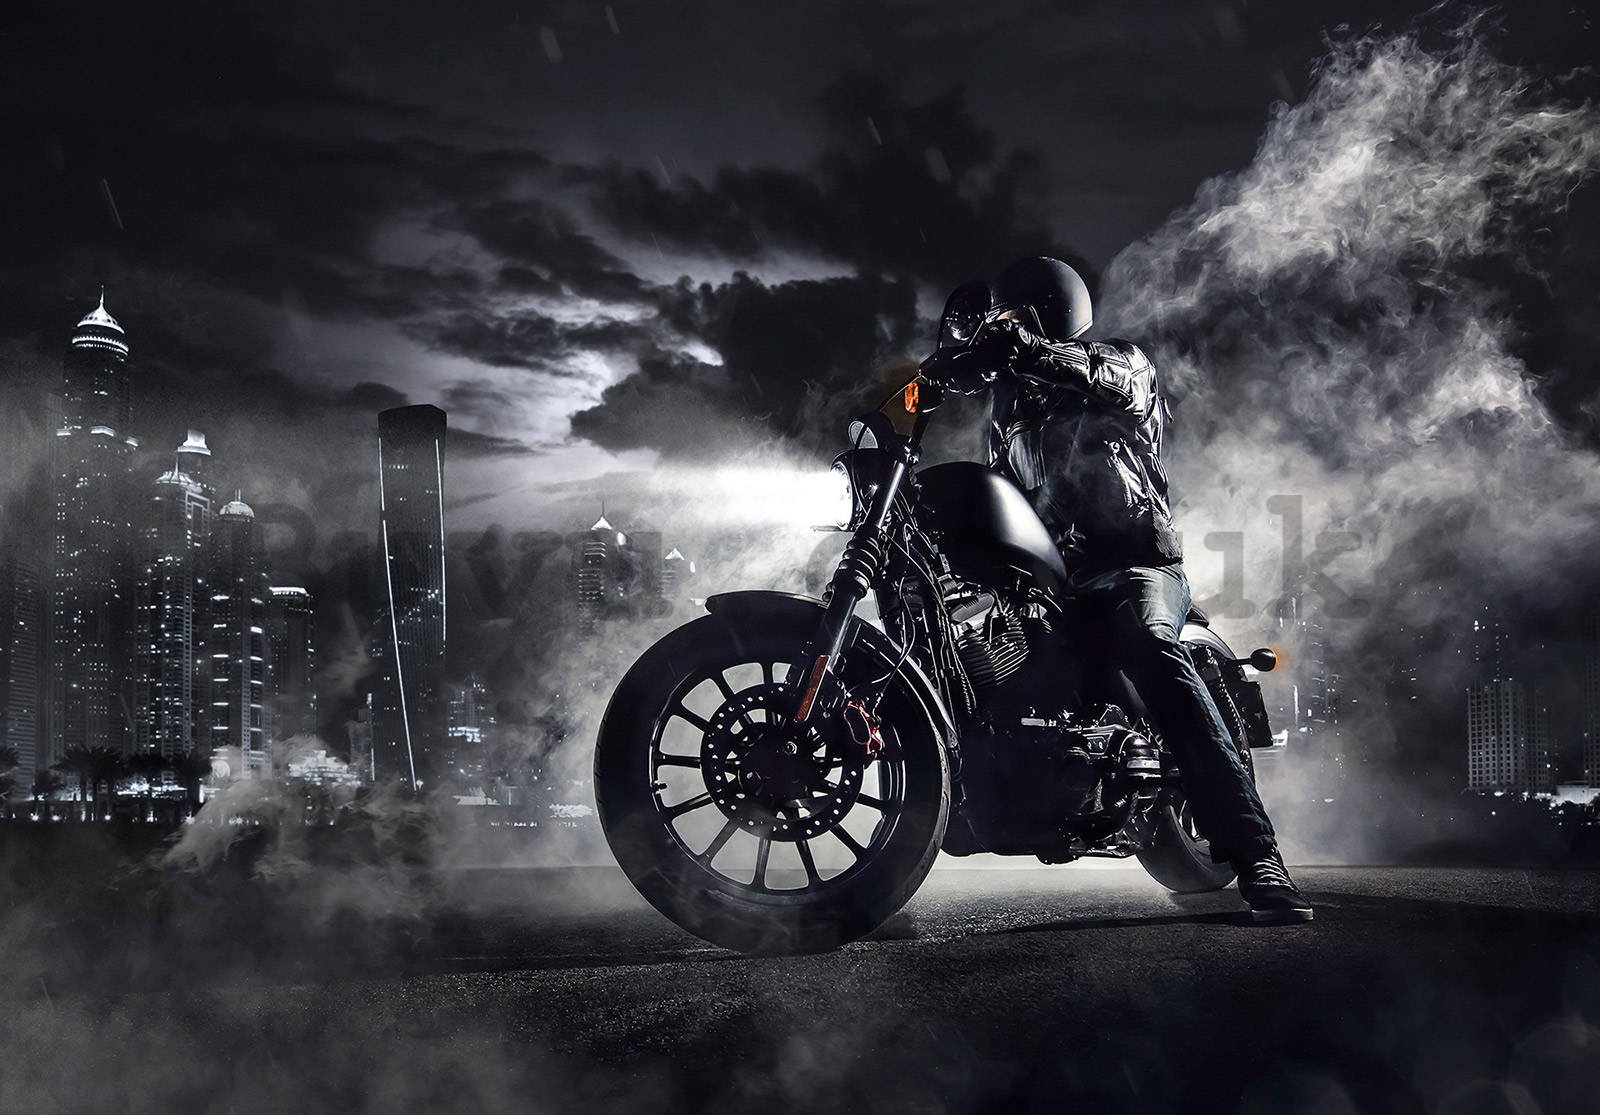 Wall mural vlies: Motorcyclist in the night city - 152,5x104 cm